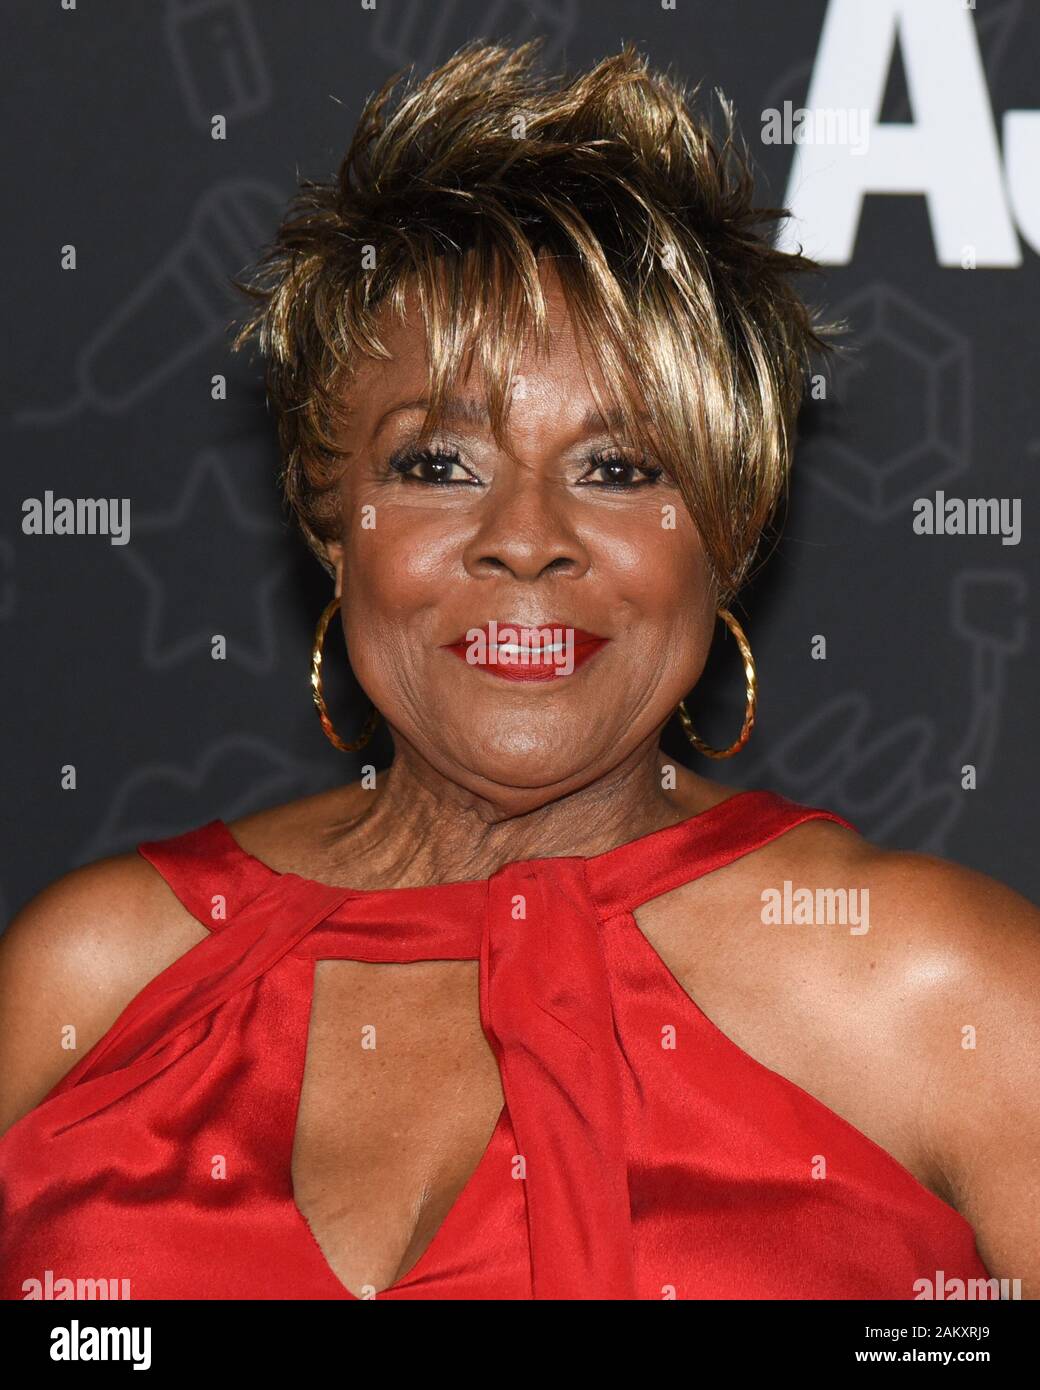 January 9, 2020, Hollywood, CA, USA: Thelma Houston attends Netflix's ''AJ And The Queen'' Season 1 Premiere at The Egyptian Theatre in Hollywood. (Credit Image: © Billy Bennight/ZUMA Wire) Stock Photo